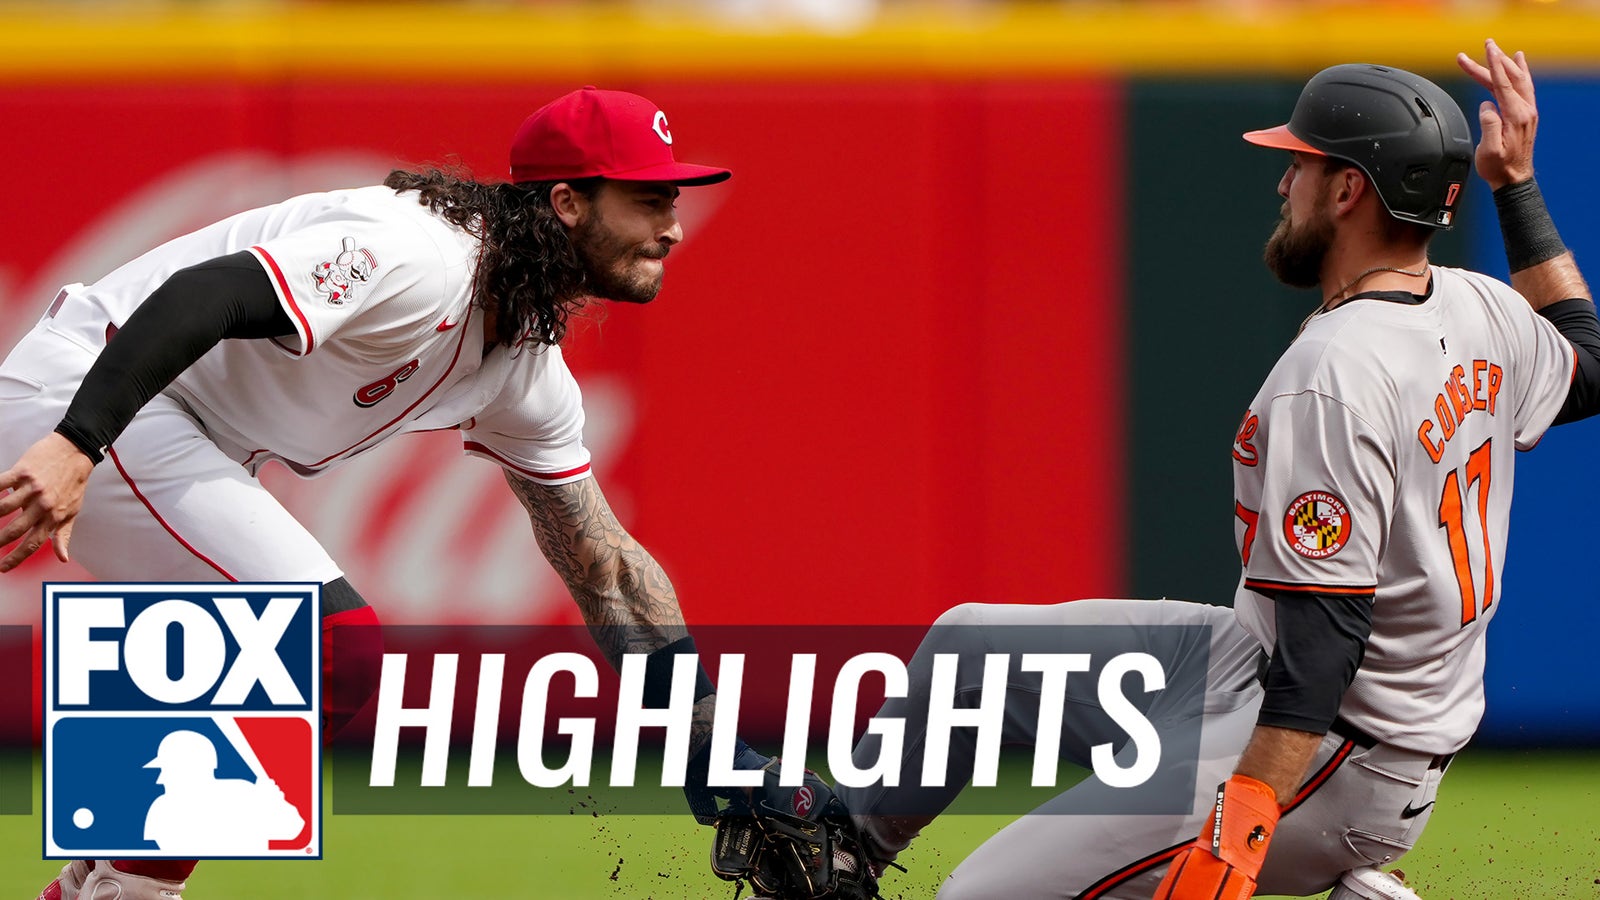 Highlights from Orioles' 11-1 win over Reds